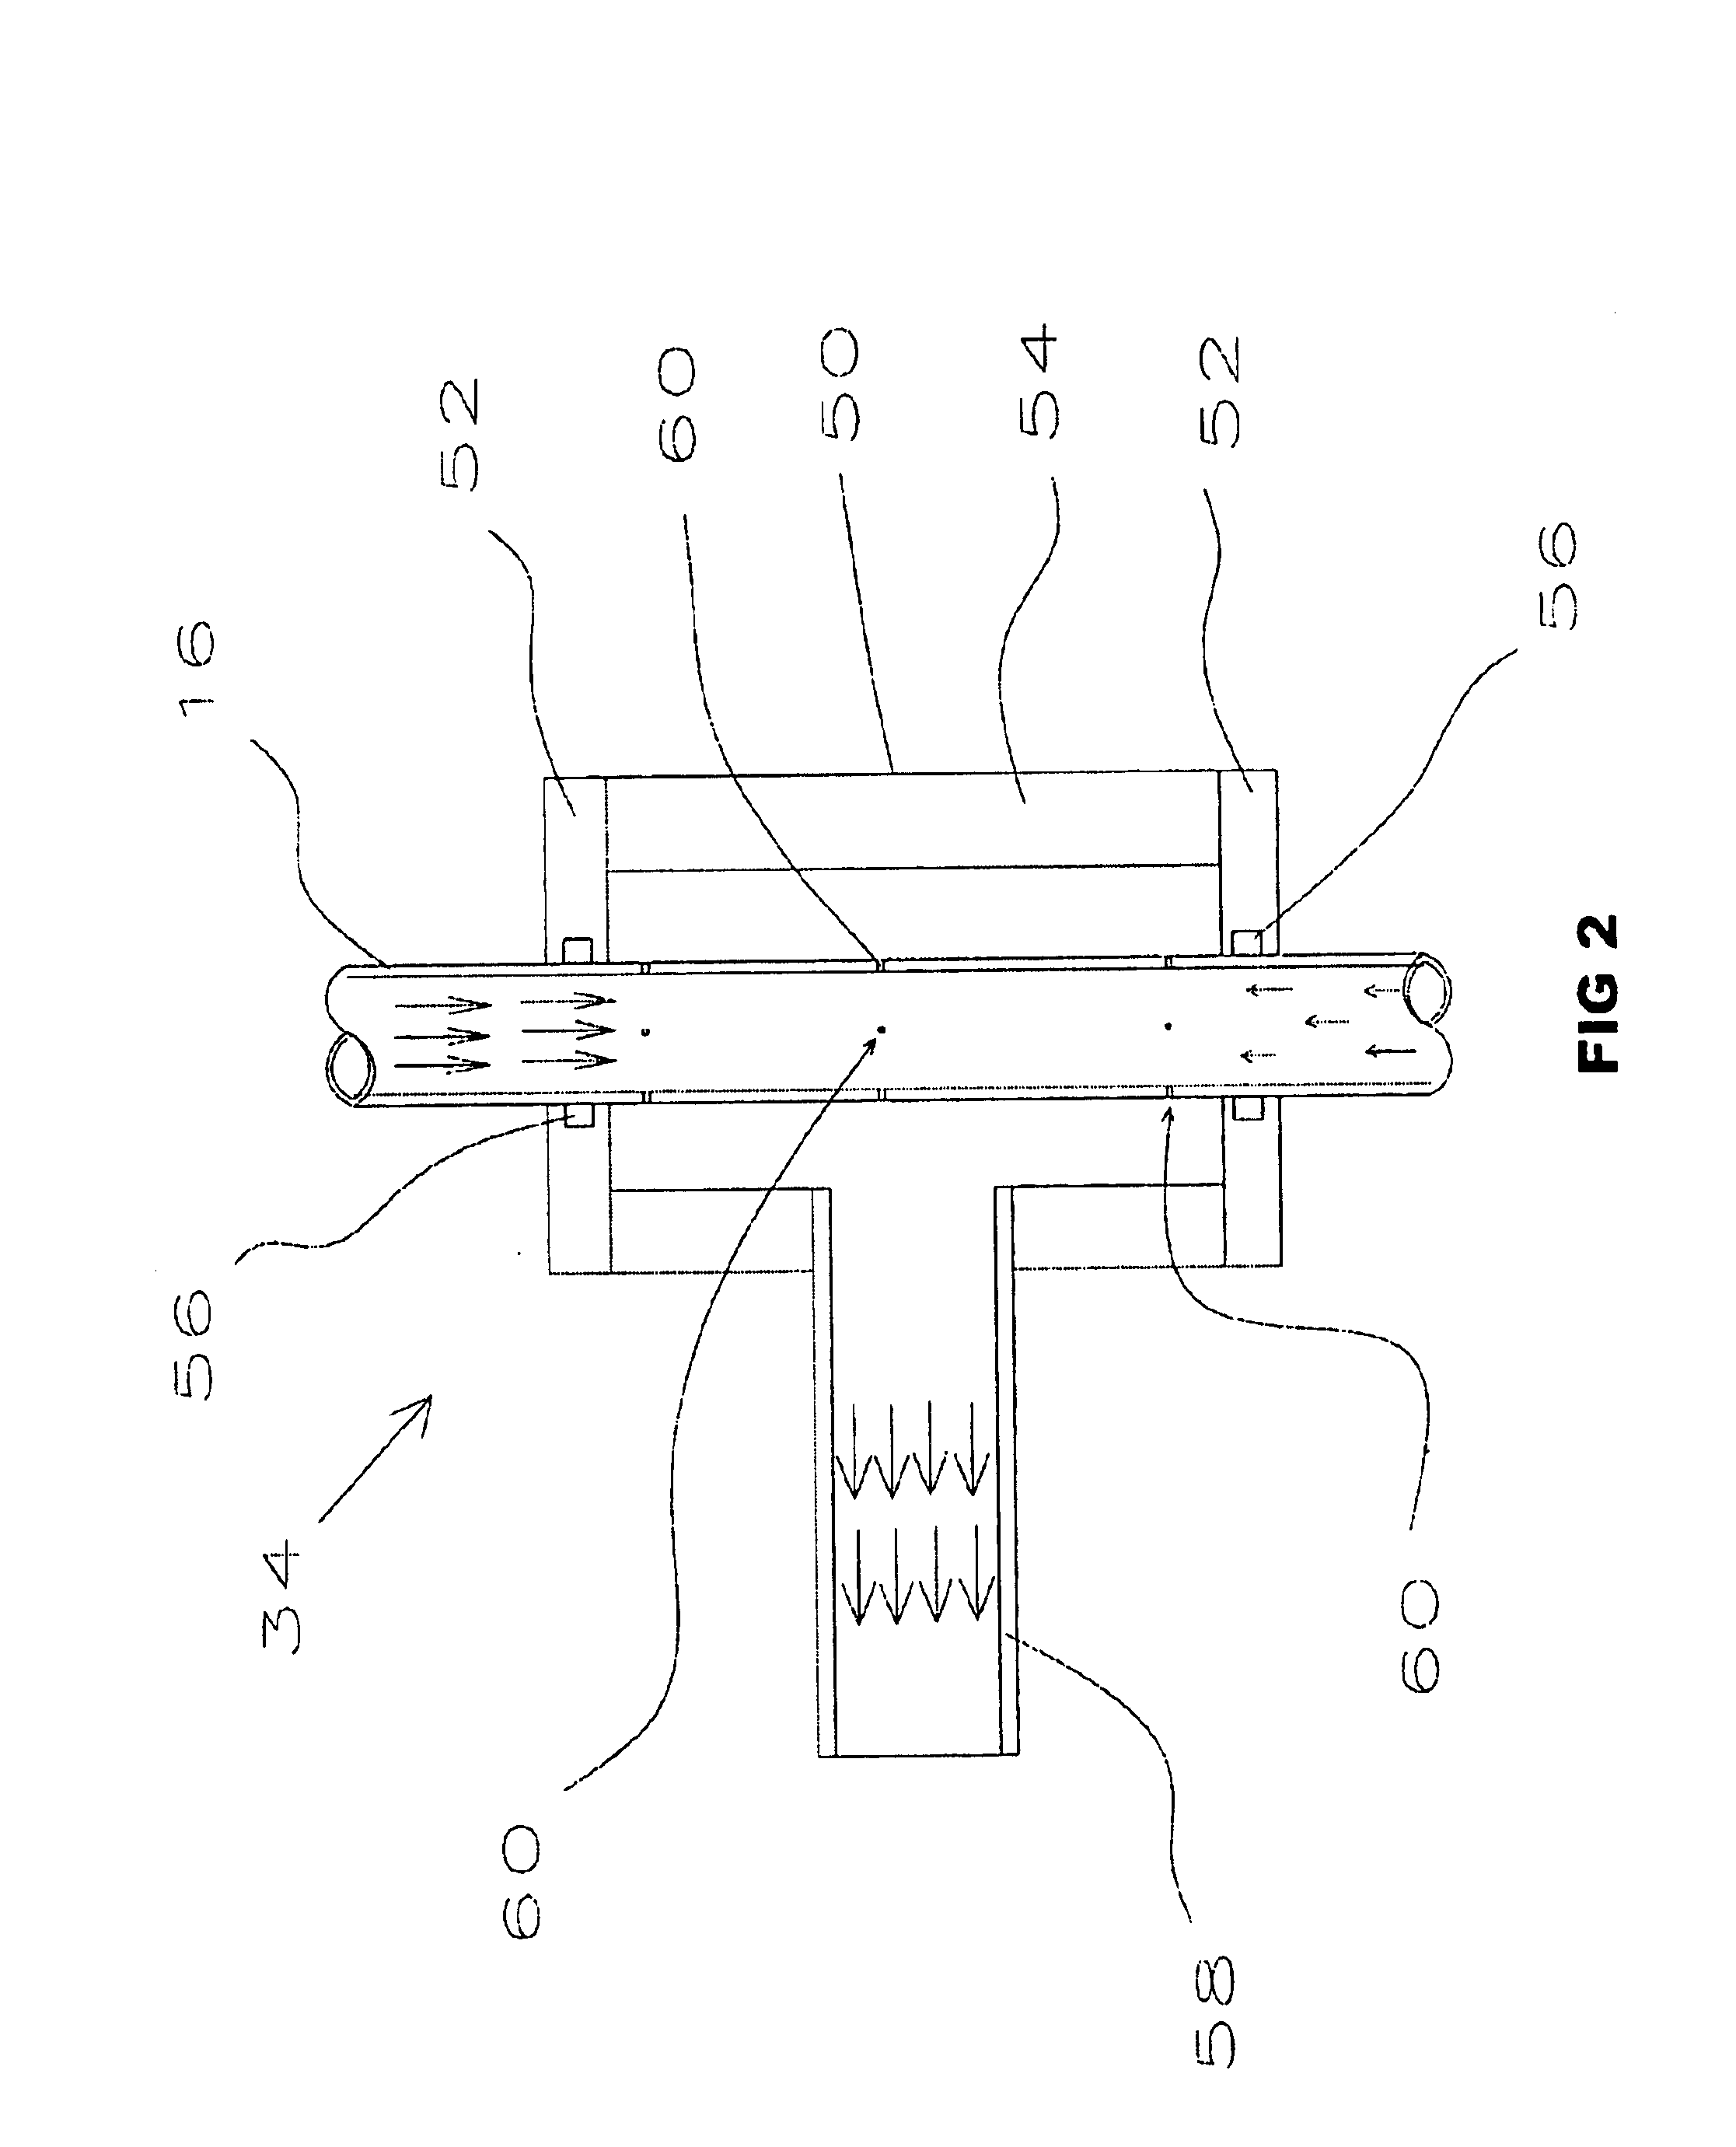 Pellet feeding system for a molding machine